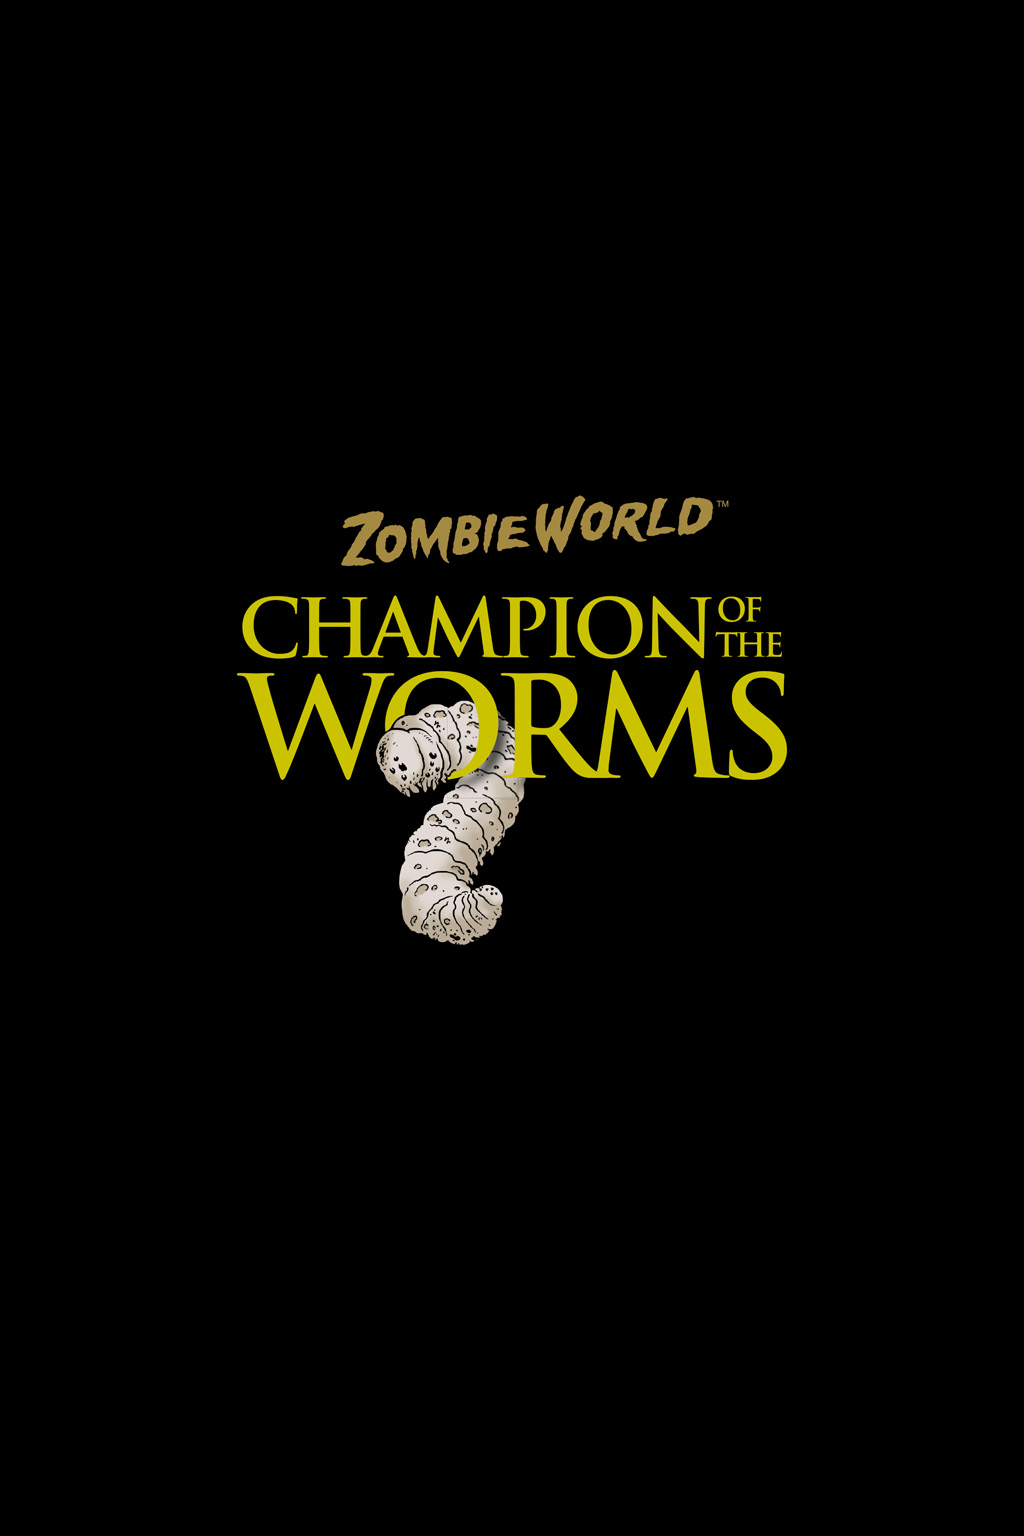 Read online Zombie World: Champion of the Worms comic -  Issue # TPB - 2